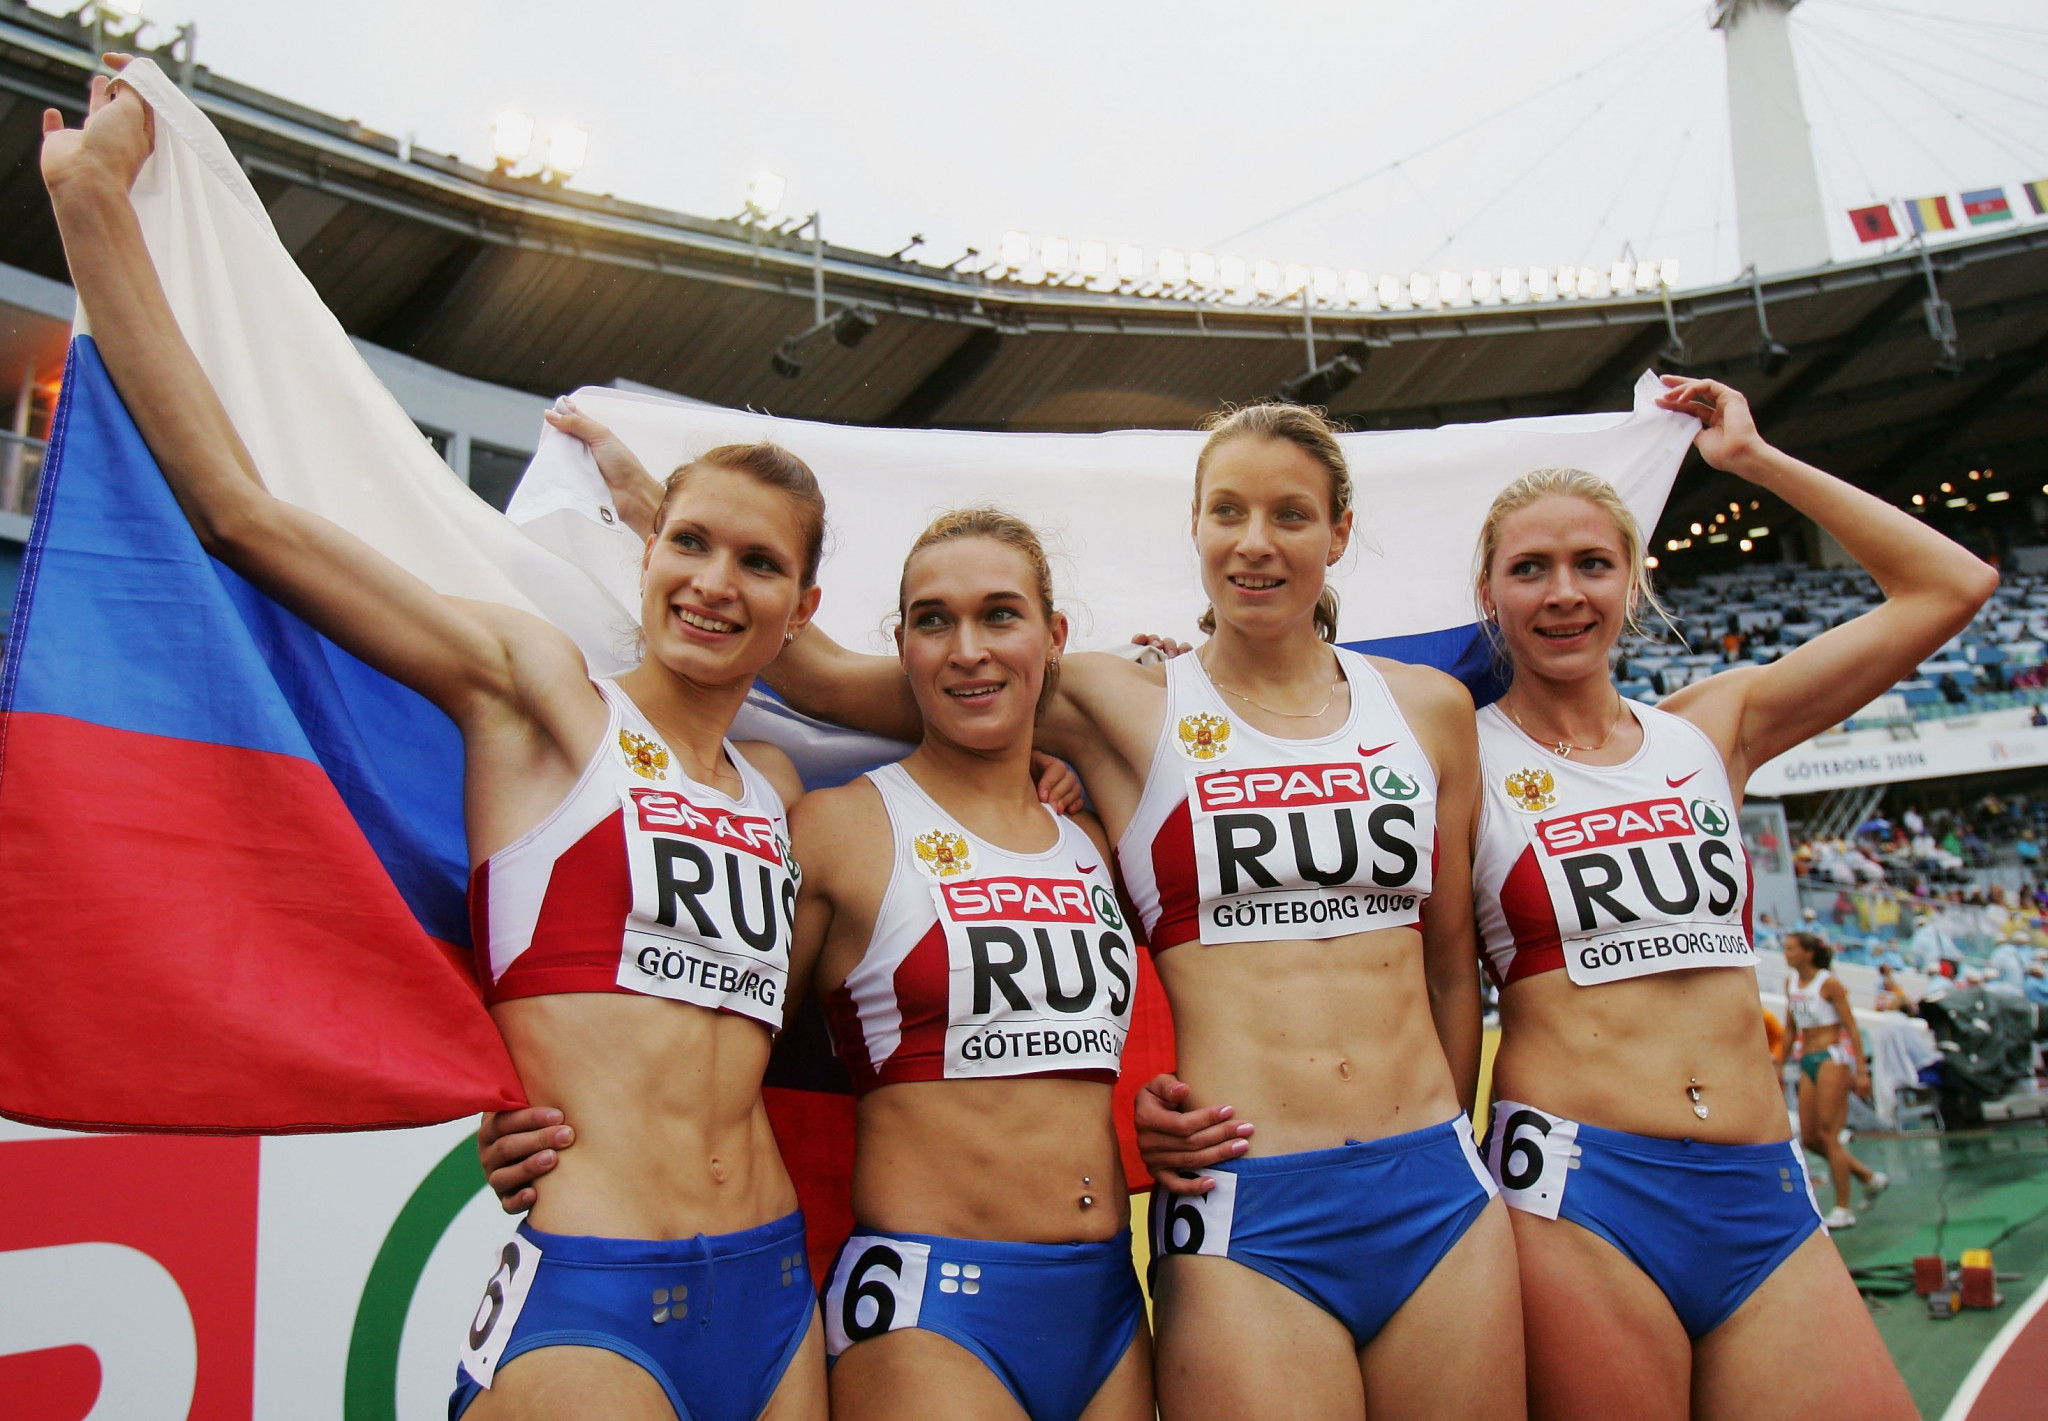 Athletes from Russia and Belarus are banned from competing at European Athletics events ©Getty Images